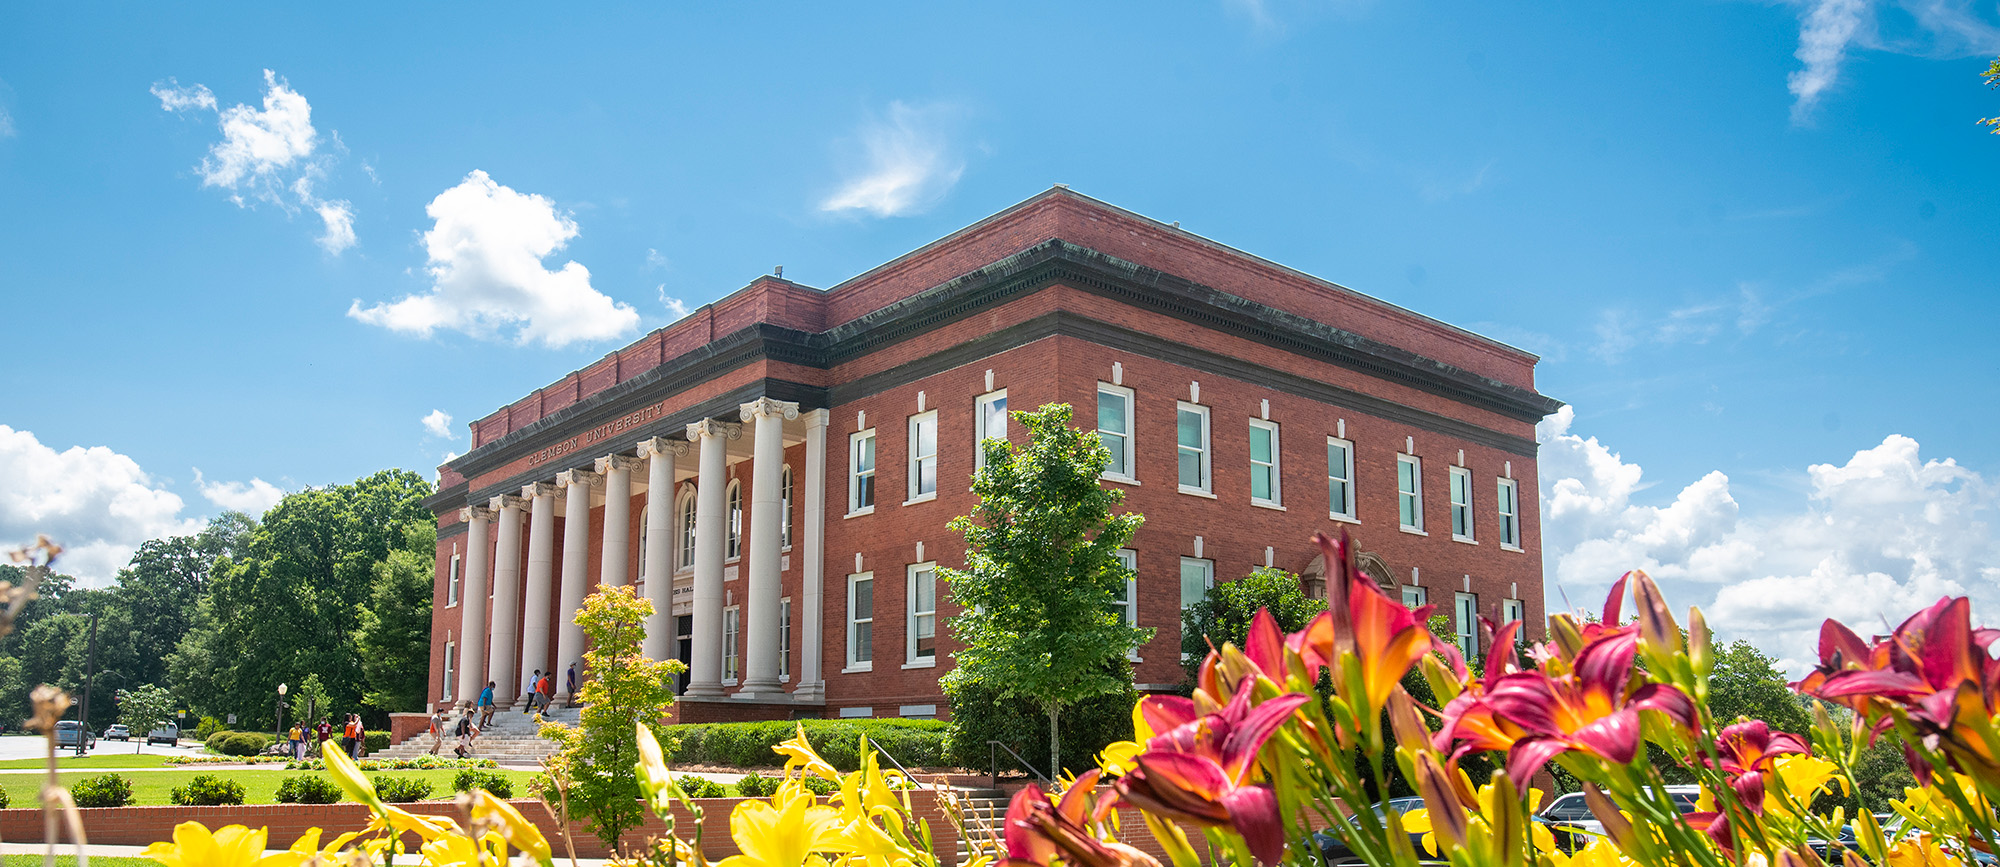 Sikes Hall on a sunny day with flowers blooming.